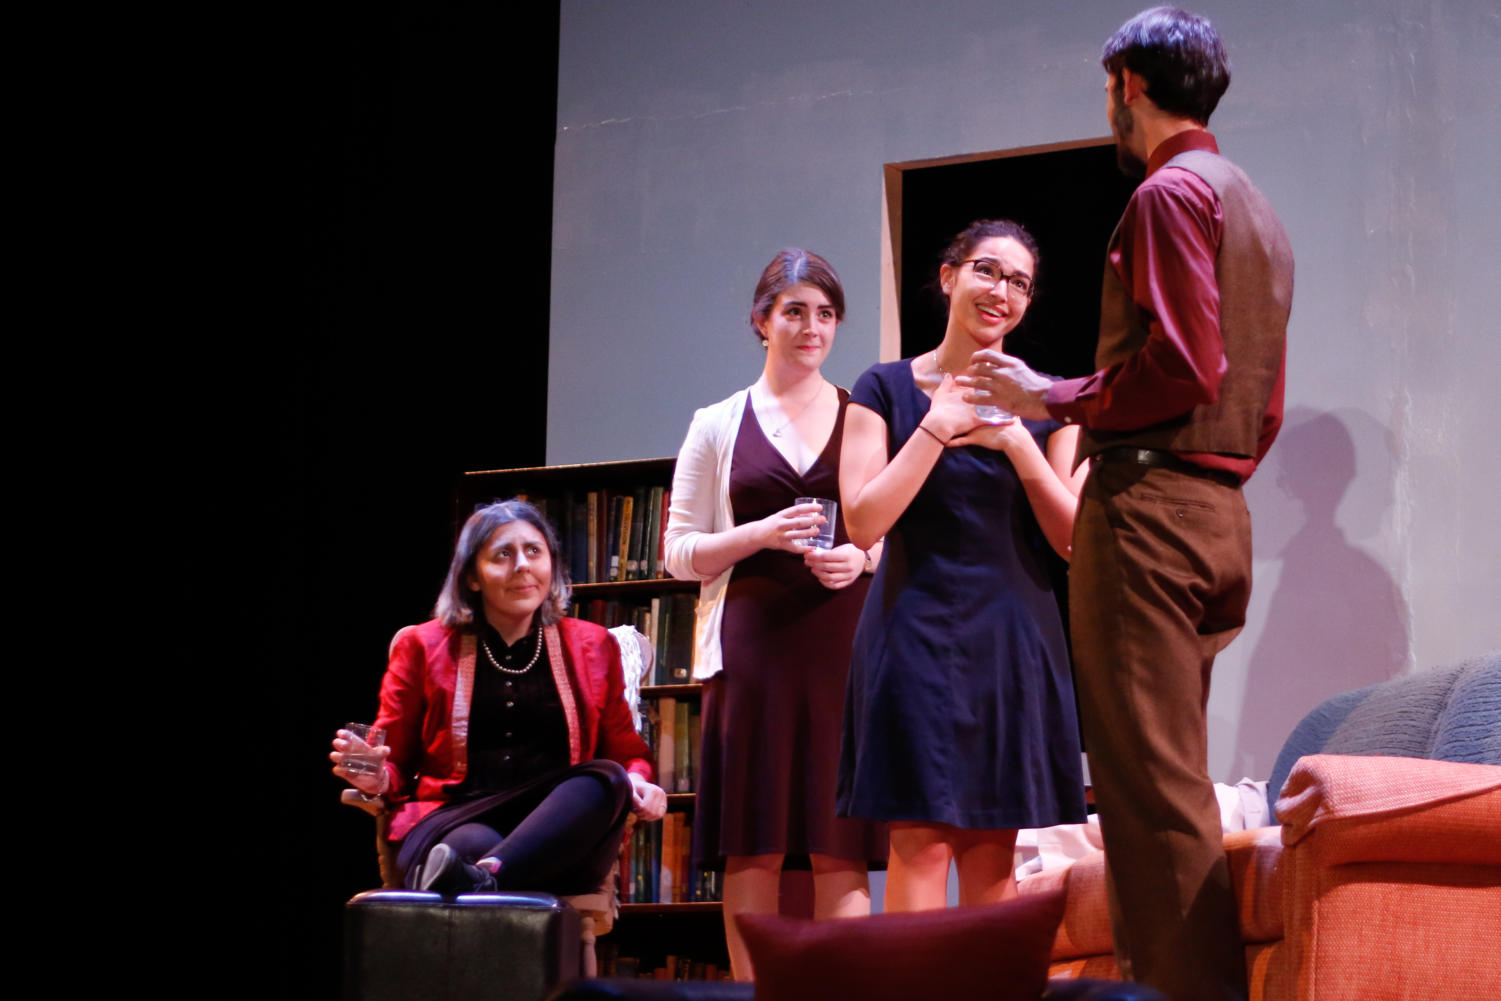 The play's main character, the social-activist Emma Joseph (played by second-year Sophie Hoyt) comes on a family visit after graduating law school.